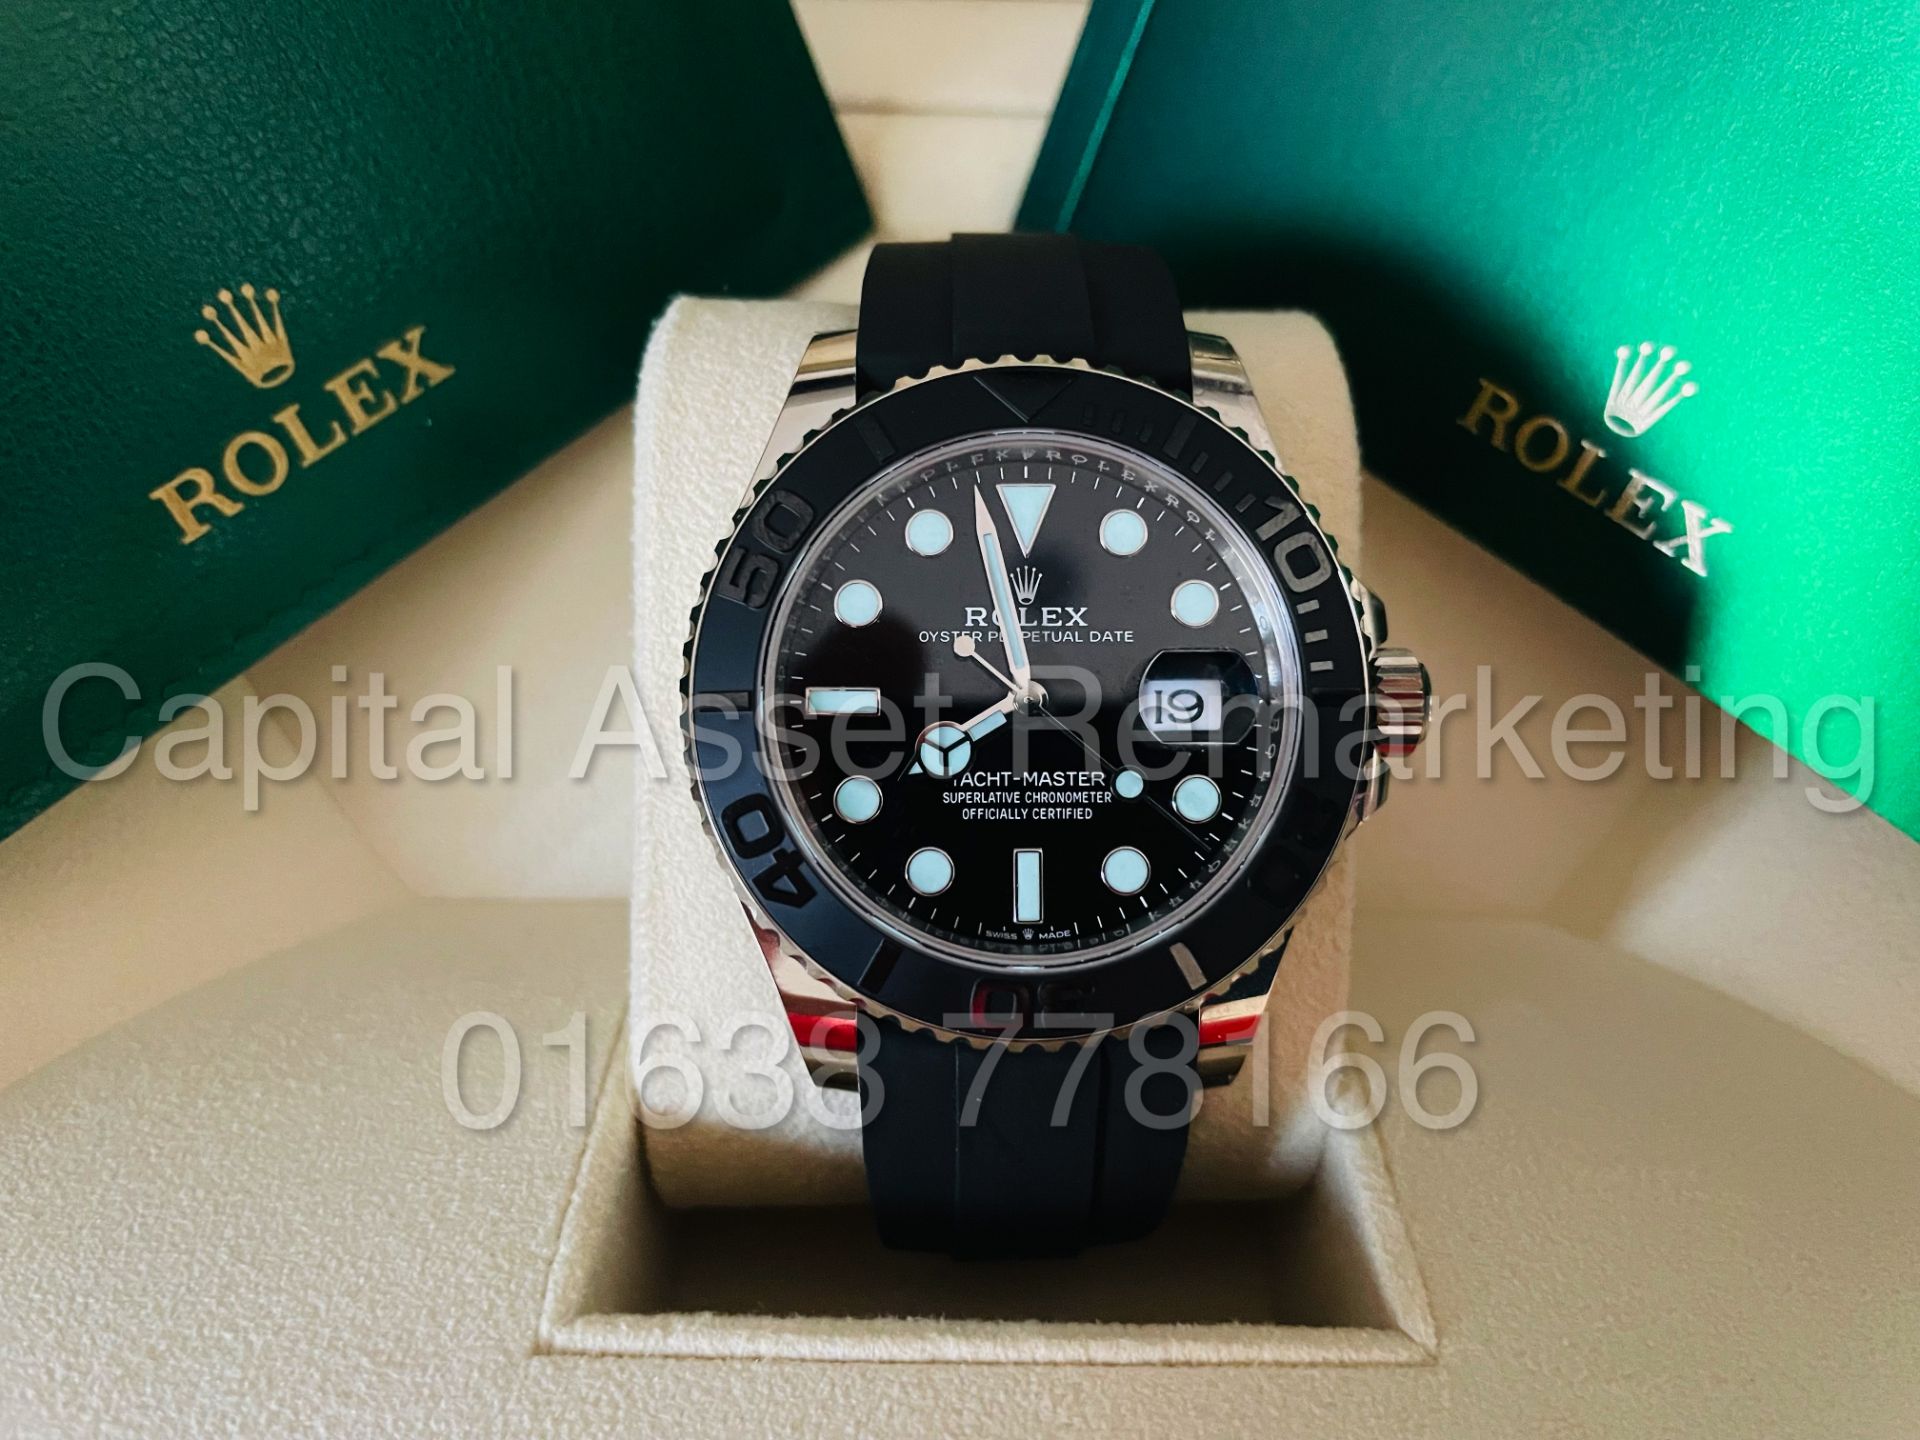 (On Sale) ROLEX YACHT-MASTER 42MM *18CT WHITE GOLD* OYSTERFLEX (2021 - BRAND NEW) *GENUINE ROLEX* - Image 5 of 13